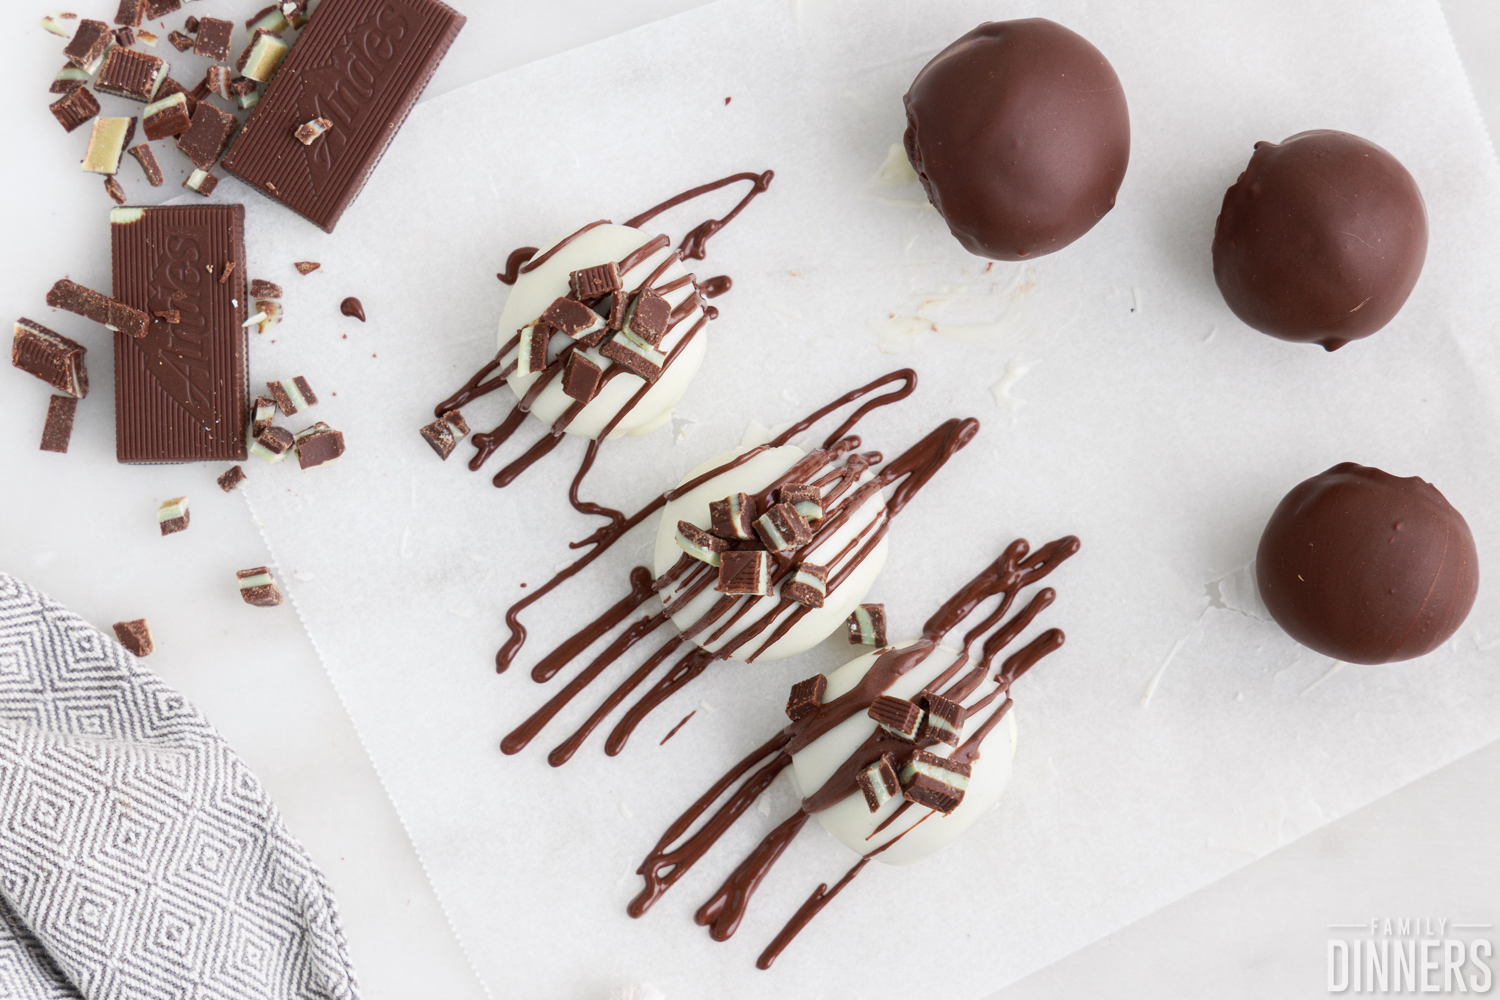 chocolate drizzled on truffles